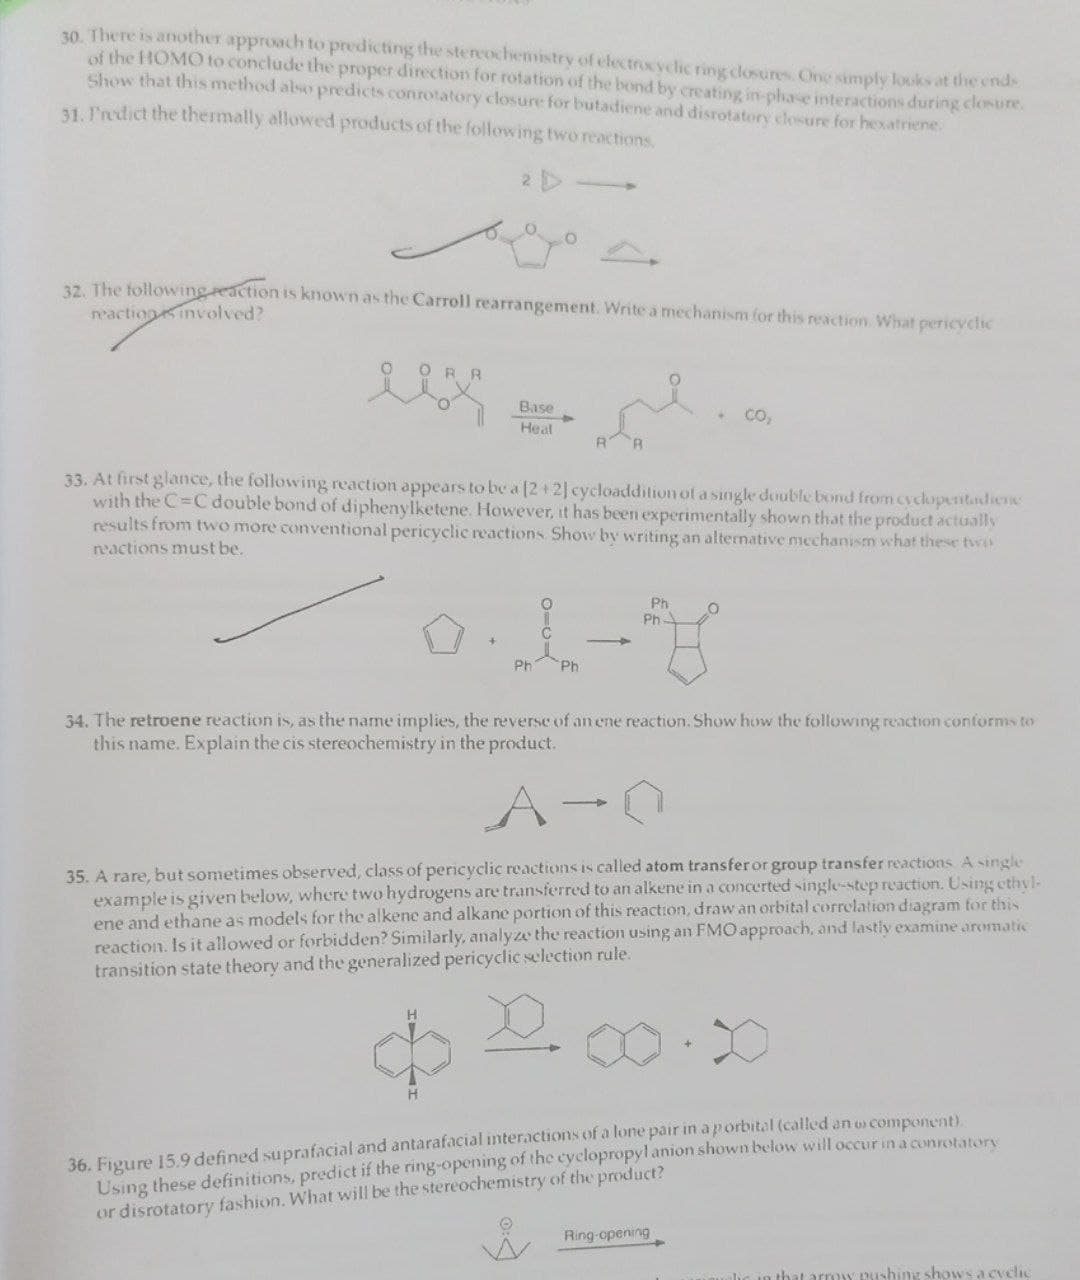 30. There is another approach to predicting the stereochemistry of electrocyclic ring closures. One simply looks at the ends
of the HOMO to conclude the proper direction for rotation of the bond by creating in-phase interactions during closure.
Show that this method also predicts conrotatory closure for butadiene and disrotatory closure for hexatriene.
31. Predict the thermally allowed products of the following two reactions.
2 D
O
32. The following reaction is known as the Carroll rearrangement. Write a mechanism for this reaction. What pericyclic
reactions involved?
RR
H
Base
Heal
O
33. At first glance, the following reaction appears to be a [2 + 2] cycloaddition of a single double bond from cyclopentadiene
with the C=C double bond of diphenylketene. However, it has been experimentally shown that the product actually
results from two more conventional pericyclic reactions. Show by writing an alternative mechanism what these two
reactions must be.
I
Ph
Ph
Ph
Ph-
CO₂
O
34. The retroene reaction is, as the name implies, the reverse of an ene reaction. Show how the following reaction conforms to
this name. Explain the cis stereochemistry in the product.
A
35. A rare, but sometimes observed, class of pericyclic reactions is called atom transfer or group transfer reactions. A single
example is given below, where two hydrogens are transferred to an alkene in a concerted single-step reaction. Using ethyl-
ene and ethane as models for the alkene and alkane portion of this reaction, draw an orbital correlation diagram for this
reaction. Is it allowed or forbidden? Similarly, analyze the reaction using an FMO approach, and lastly examine aromatic
transition state theory and the generalized pericyclic selection rule.
Ring-opening
36. Figure 15.9 defined suprafacial and antarafacial interactions of a lone pair in ap orbital (called an o component).
Using these definitions, predict if the ring-opening of the cyclopropyl anion shown below will occur in a conrotatory
or disrotatory fashion. What will be the stereochemistry of the product?
arrow pushing shows a cvelic